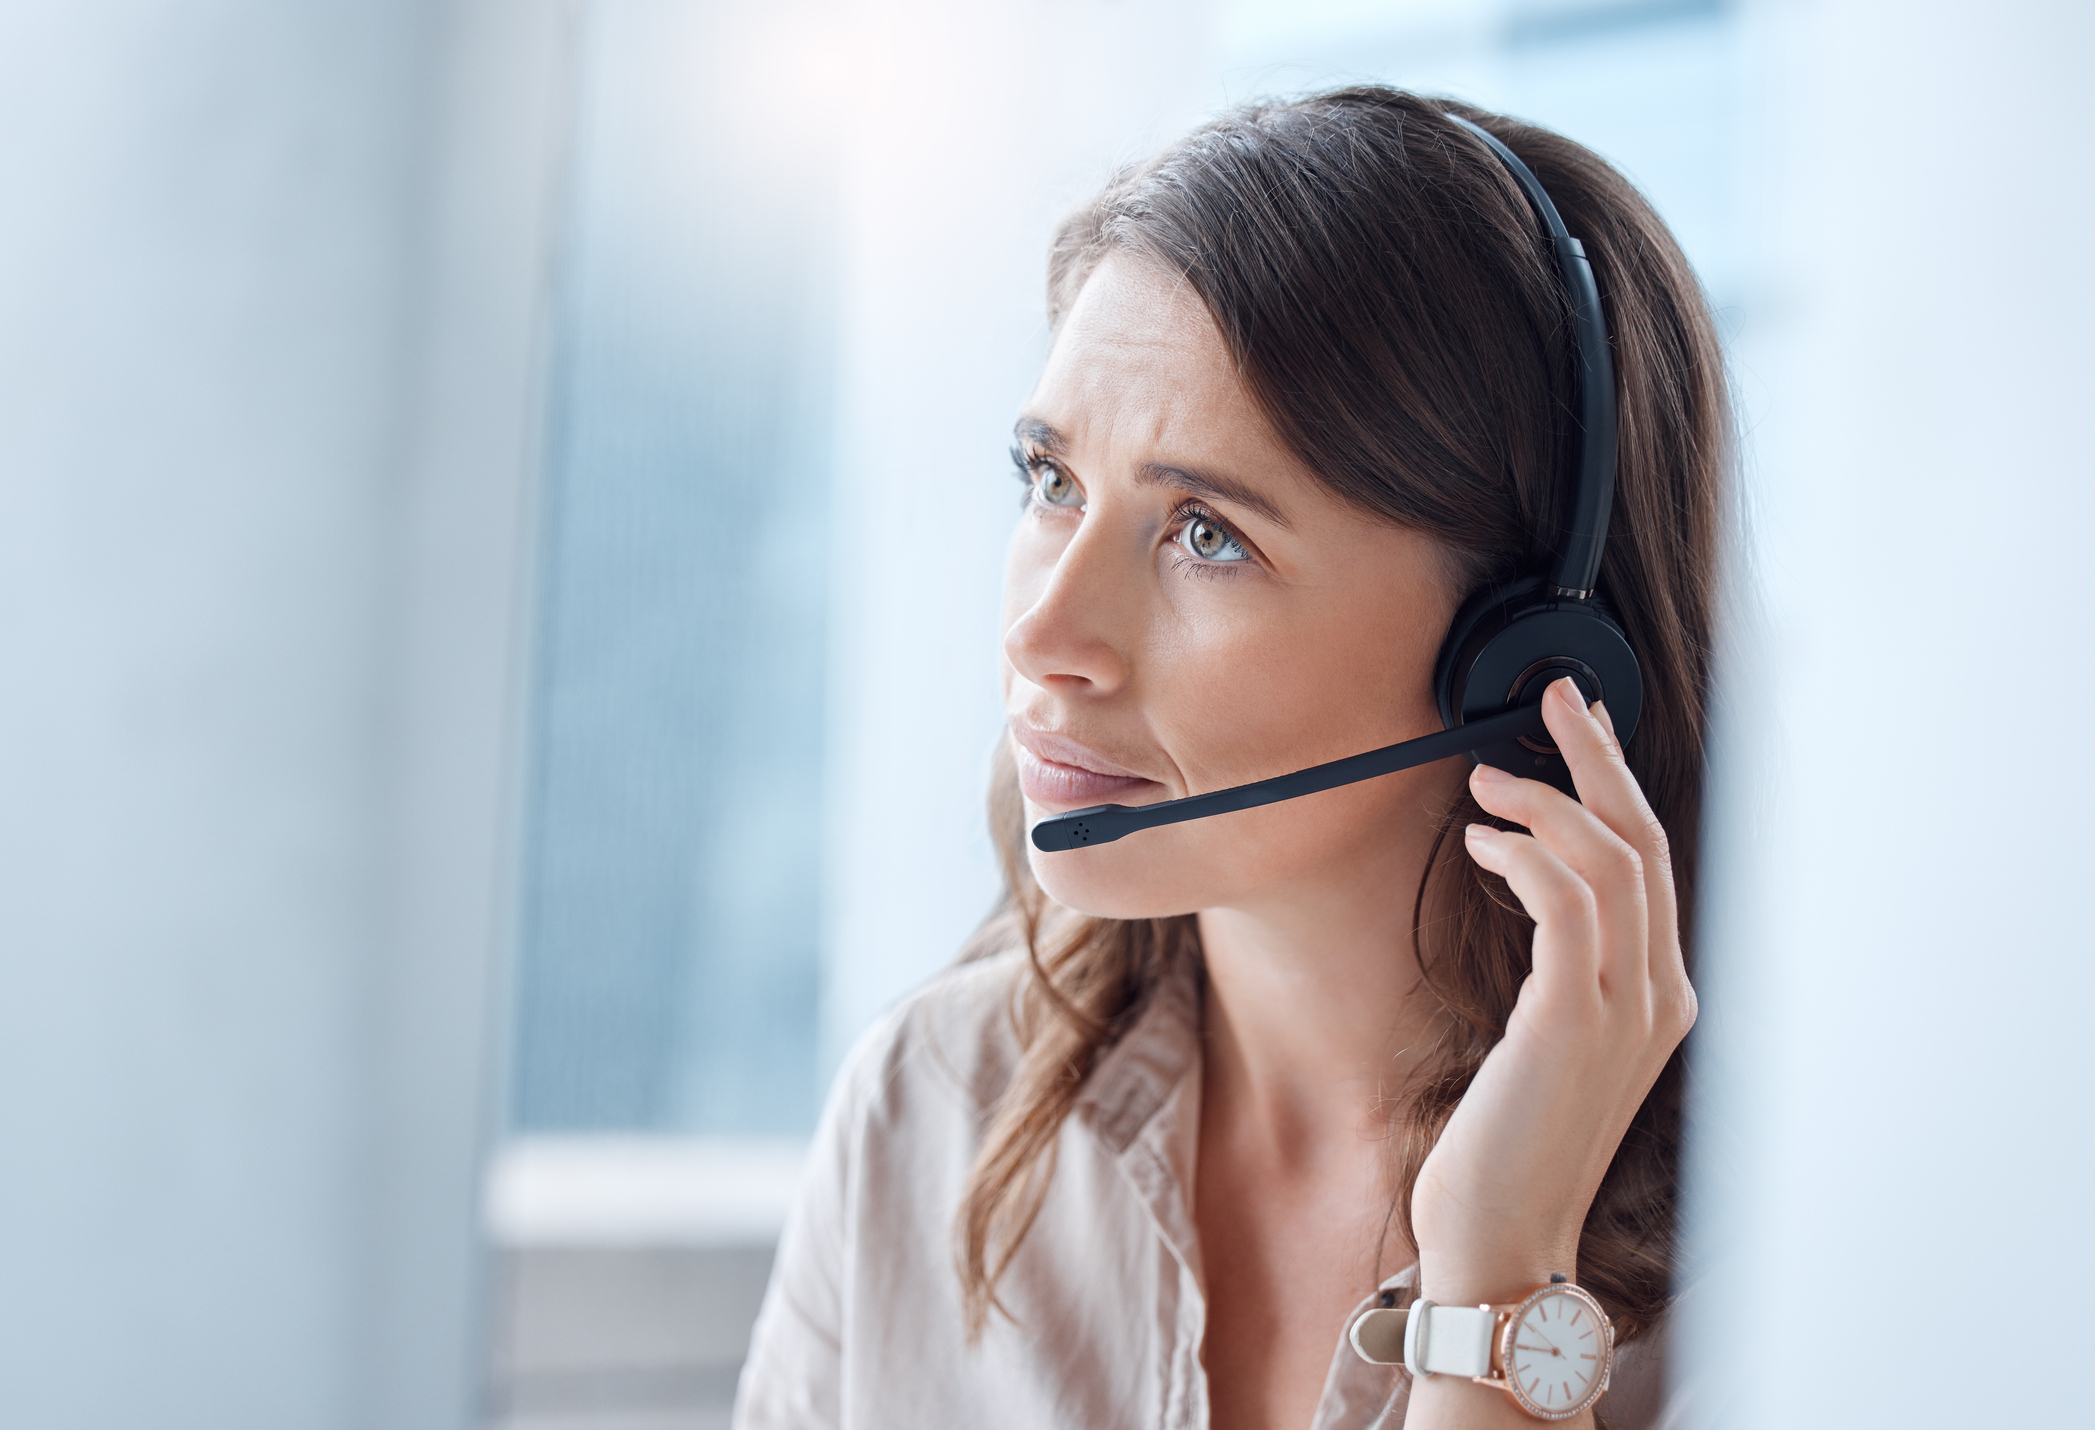 Woman with headset looking thoughtful, likely representing customer service or office work